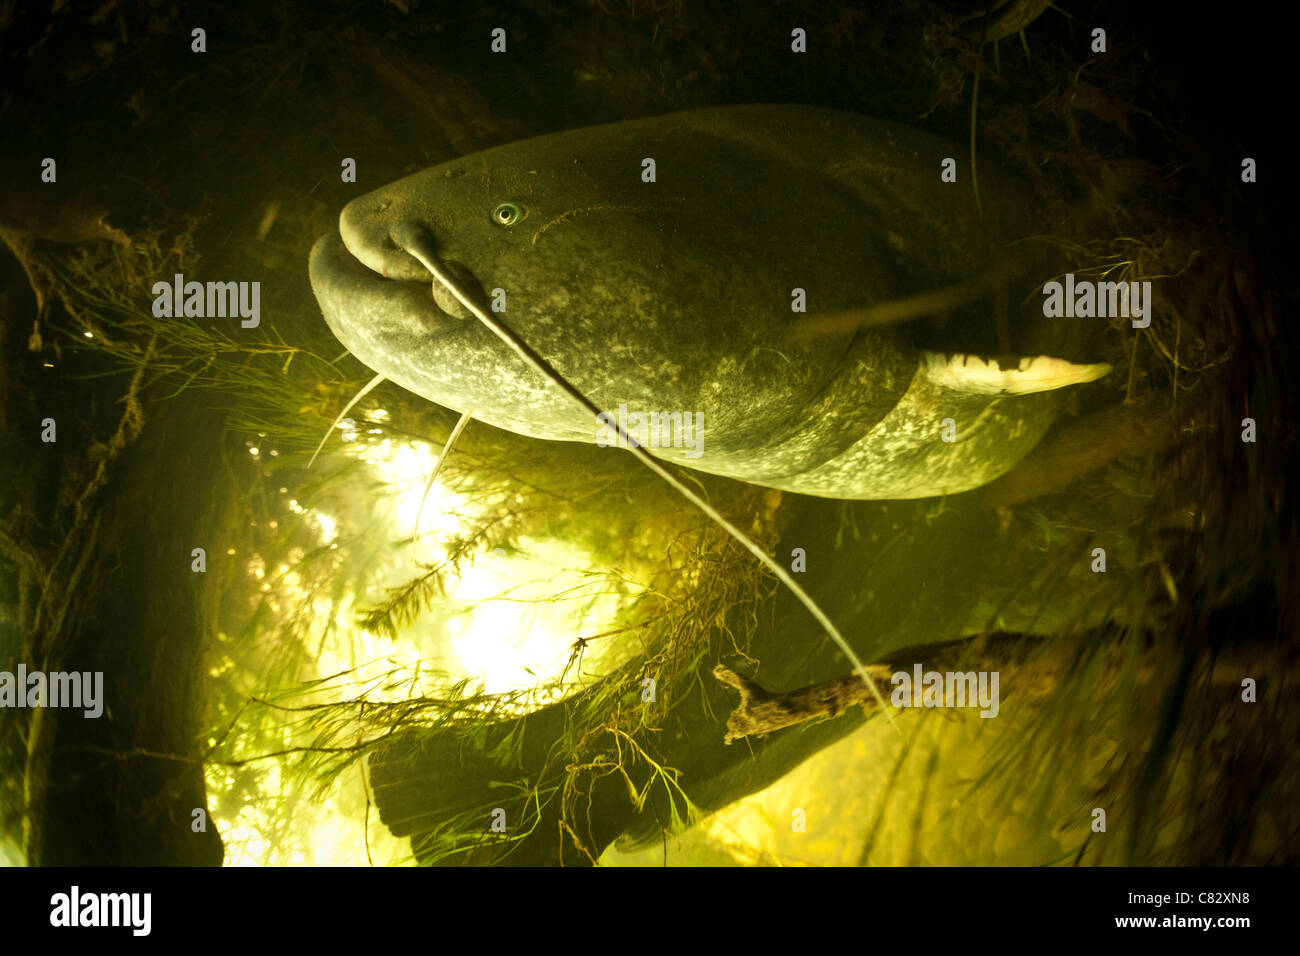 A Wels catfish (Silurus glanis) in the wild. That specimen measures nearly 8.2 ft and weighs 220 pounds or so. Stock Photo